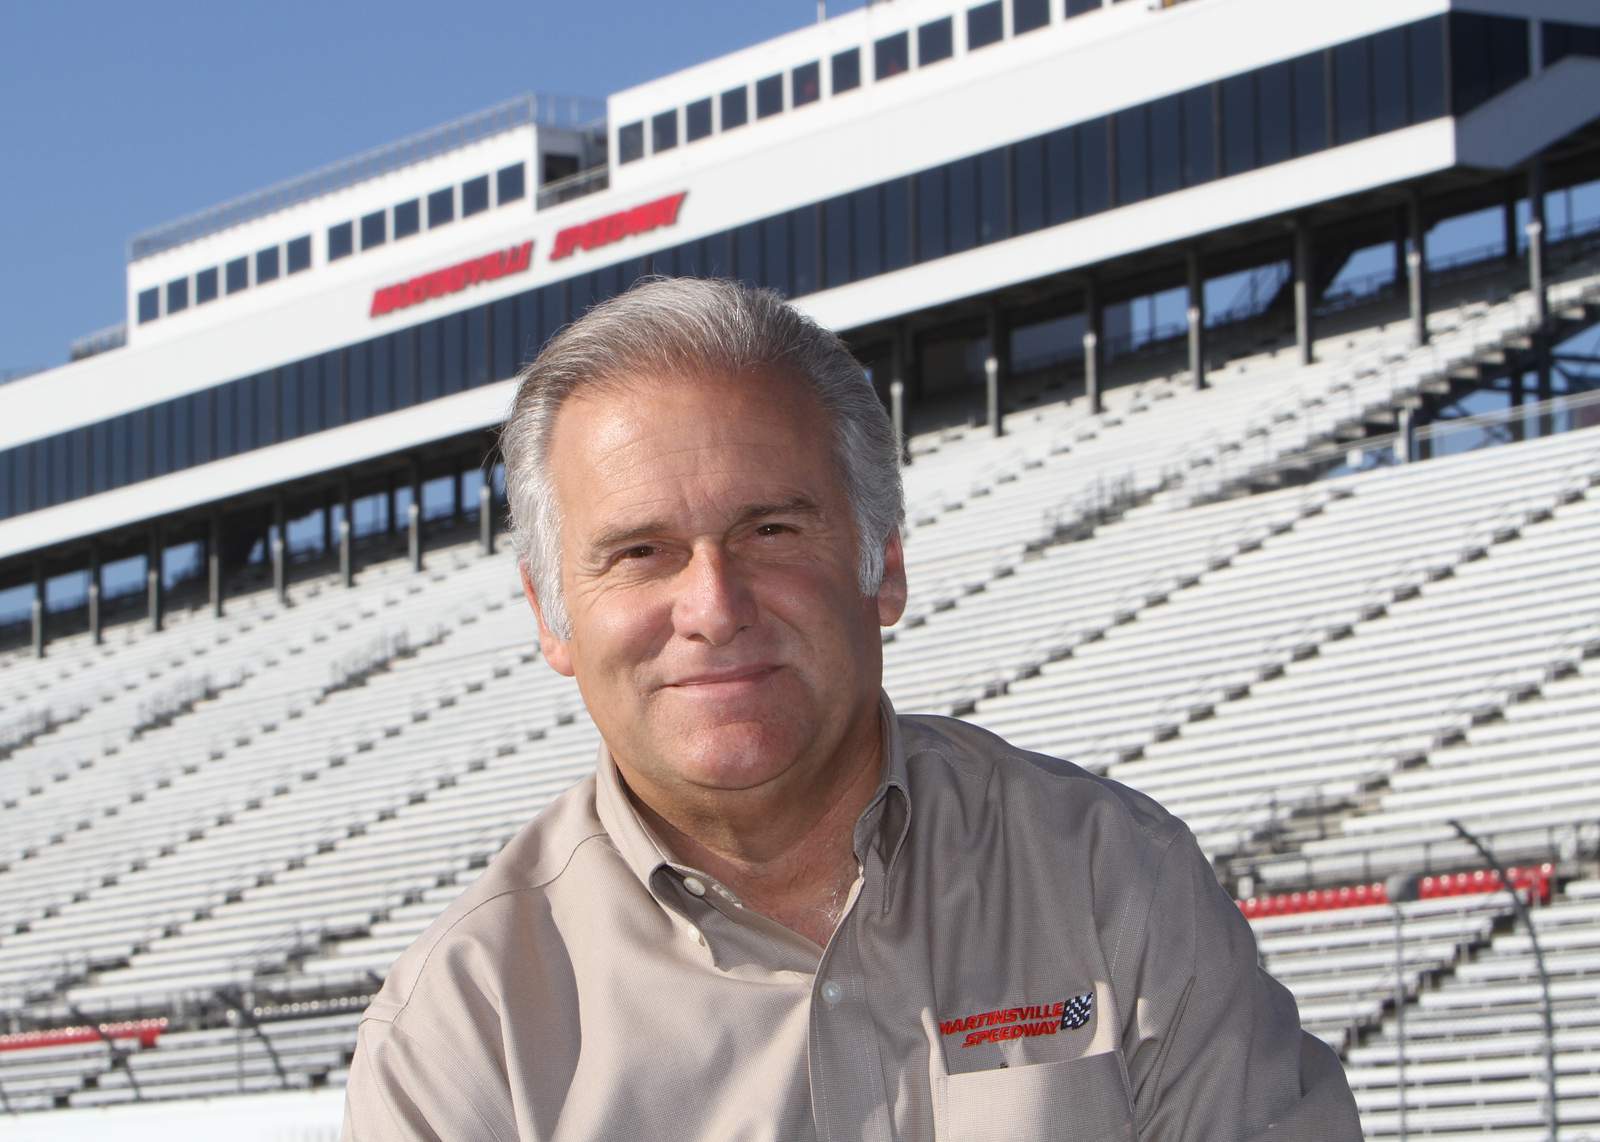 Martinsville Speedway Track President Clay Campbell recognized as 2020 Comcast Community Champion of the Year finalist